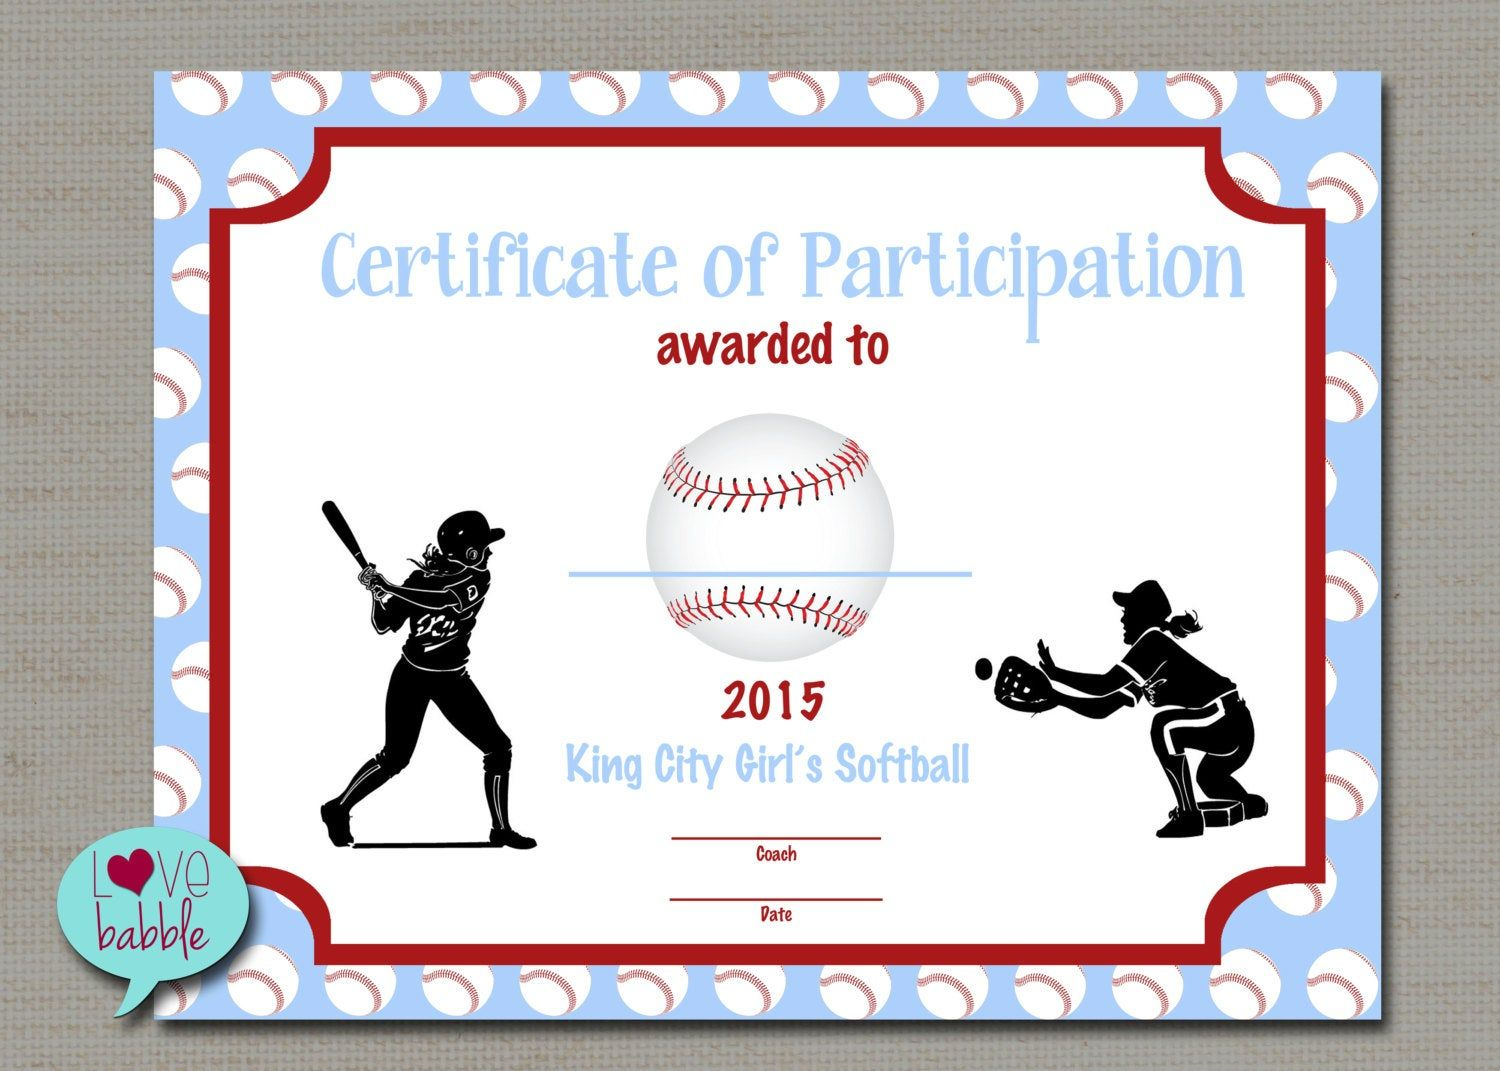 Blank Sports Certificate Templates In Softball Certificate Templates Free